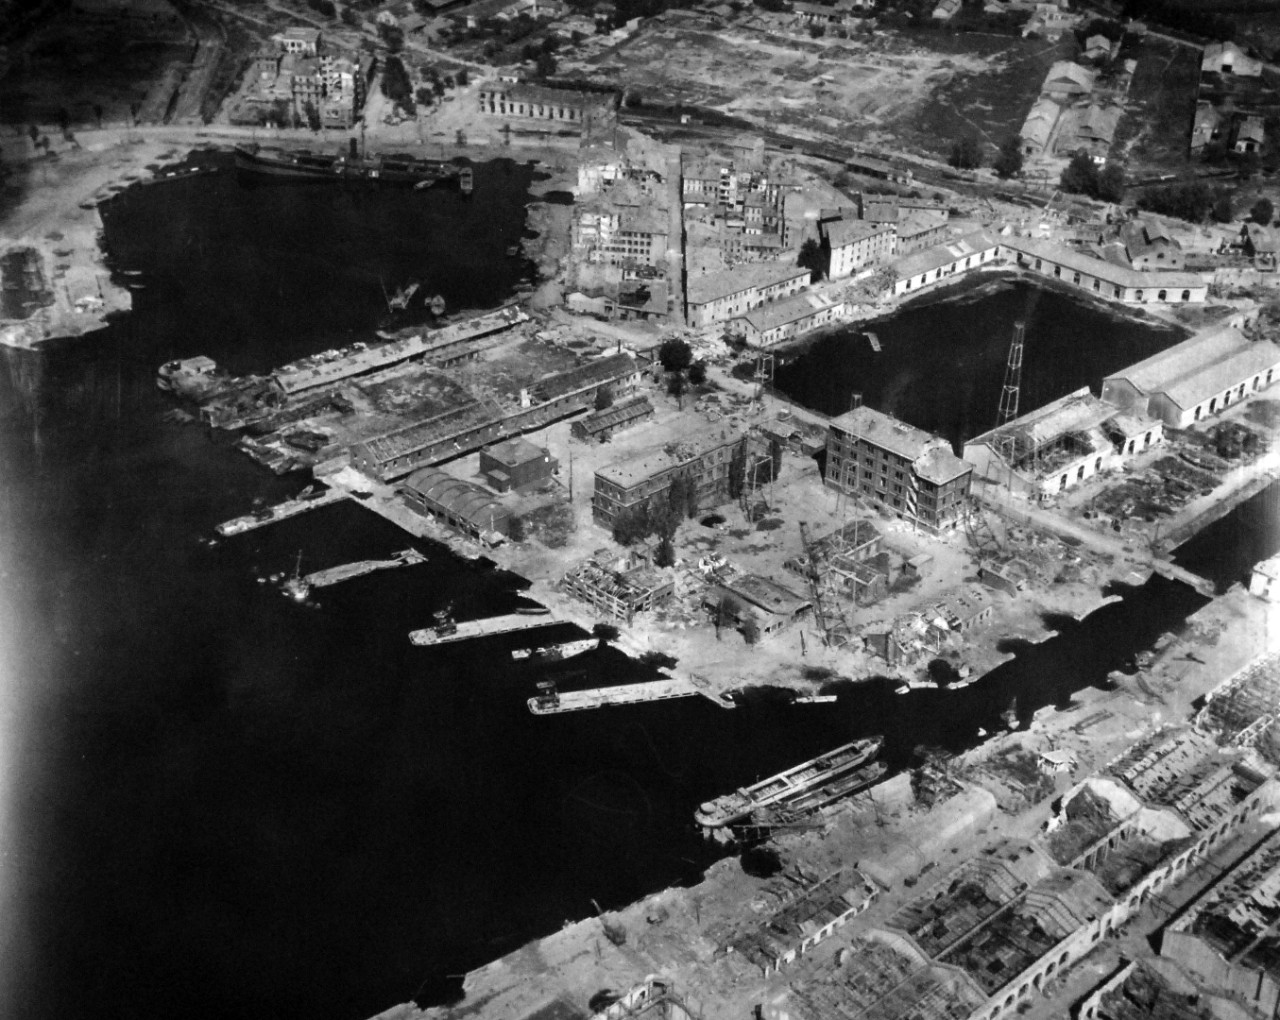 80-G-364001:  Invasion of Southern France, Toulon, August 1944.   Aerial view of the destruction to the harbor and installations at Toulon, France.  Taken by crew of USS Catoctin   (AGC 5).  Photograph received on 2 April 1946.   Official U.S. Navy Photograph, now in the collections of the National Archives.  (2014/7/10).